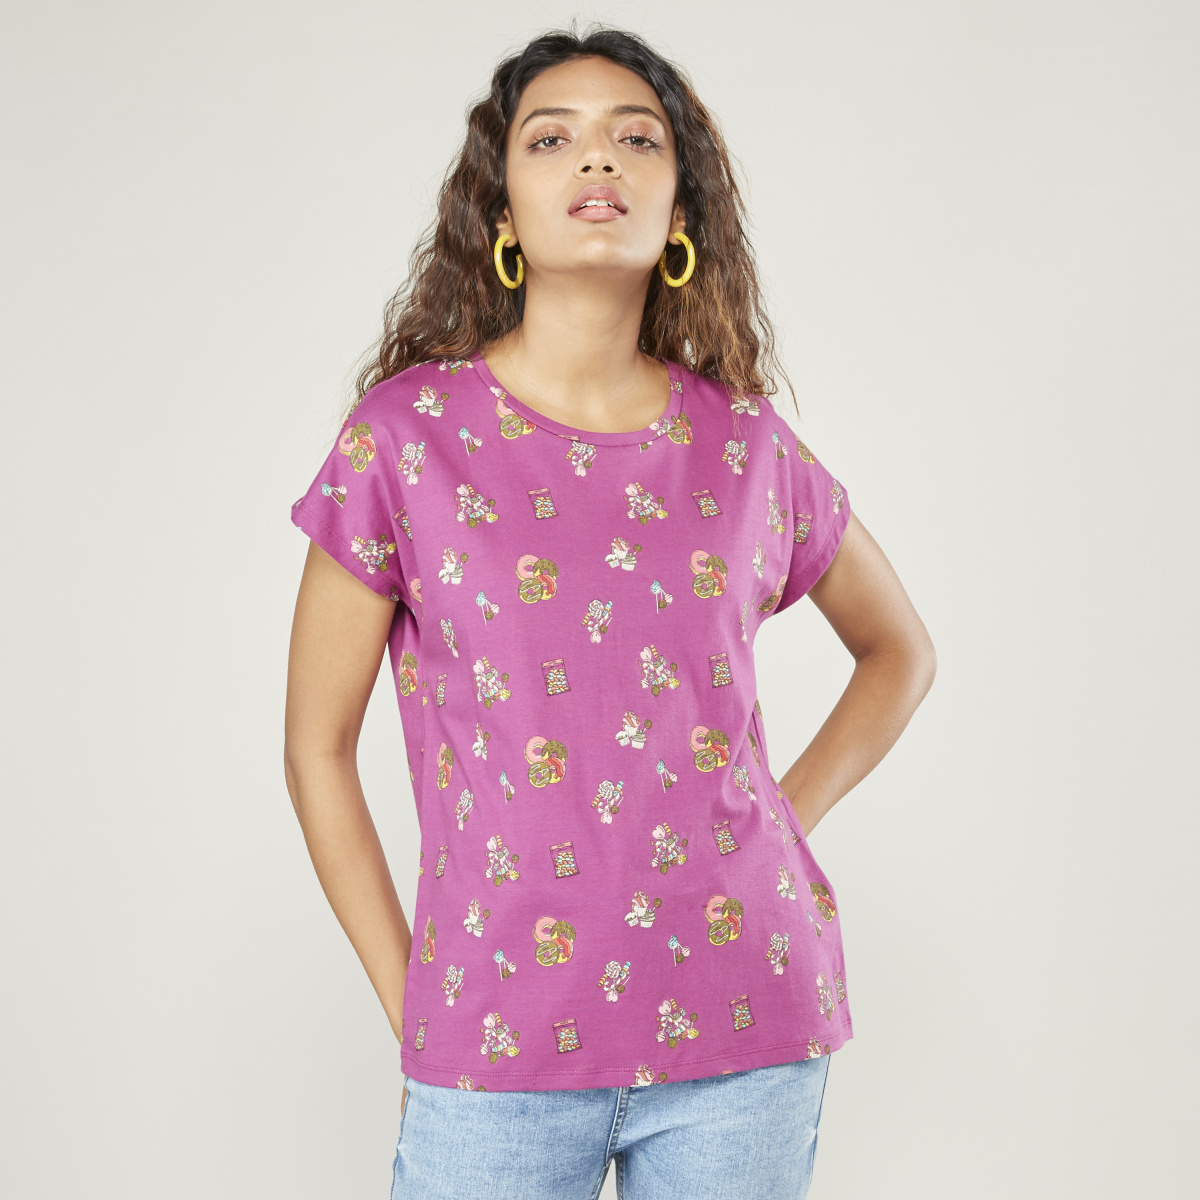 Max Fashions Printed Round Neck T-shirt with Short Sleeves